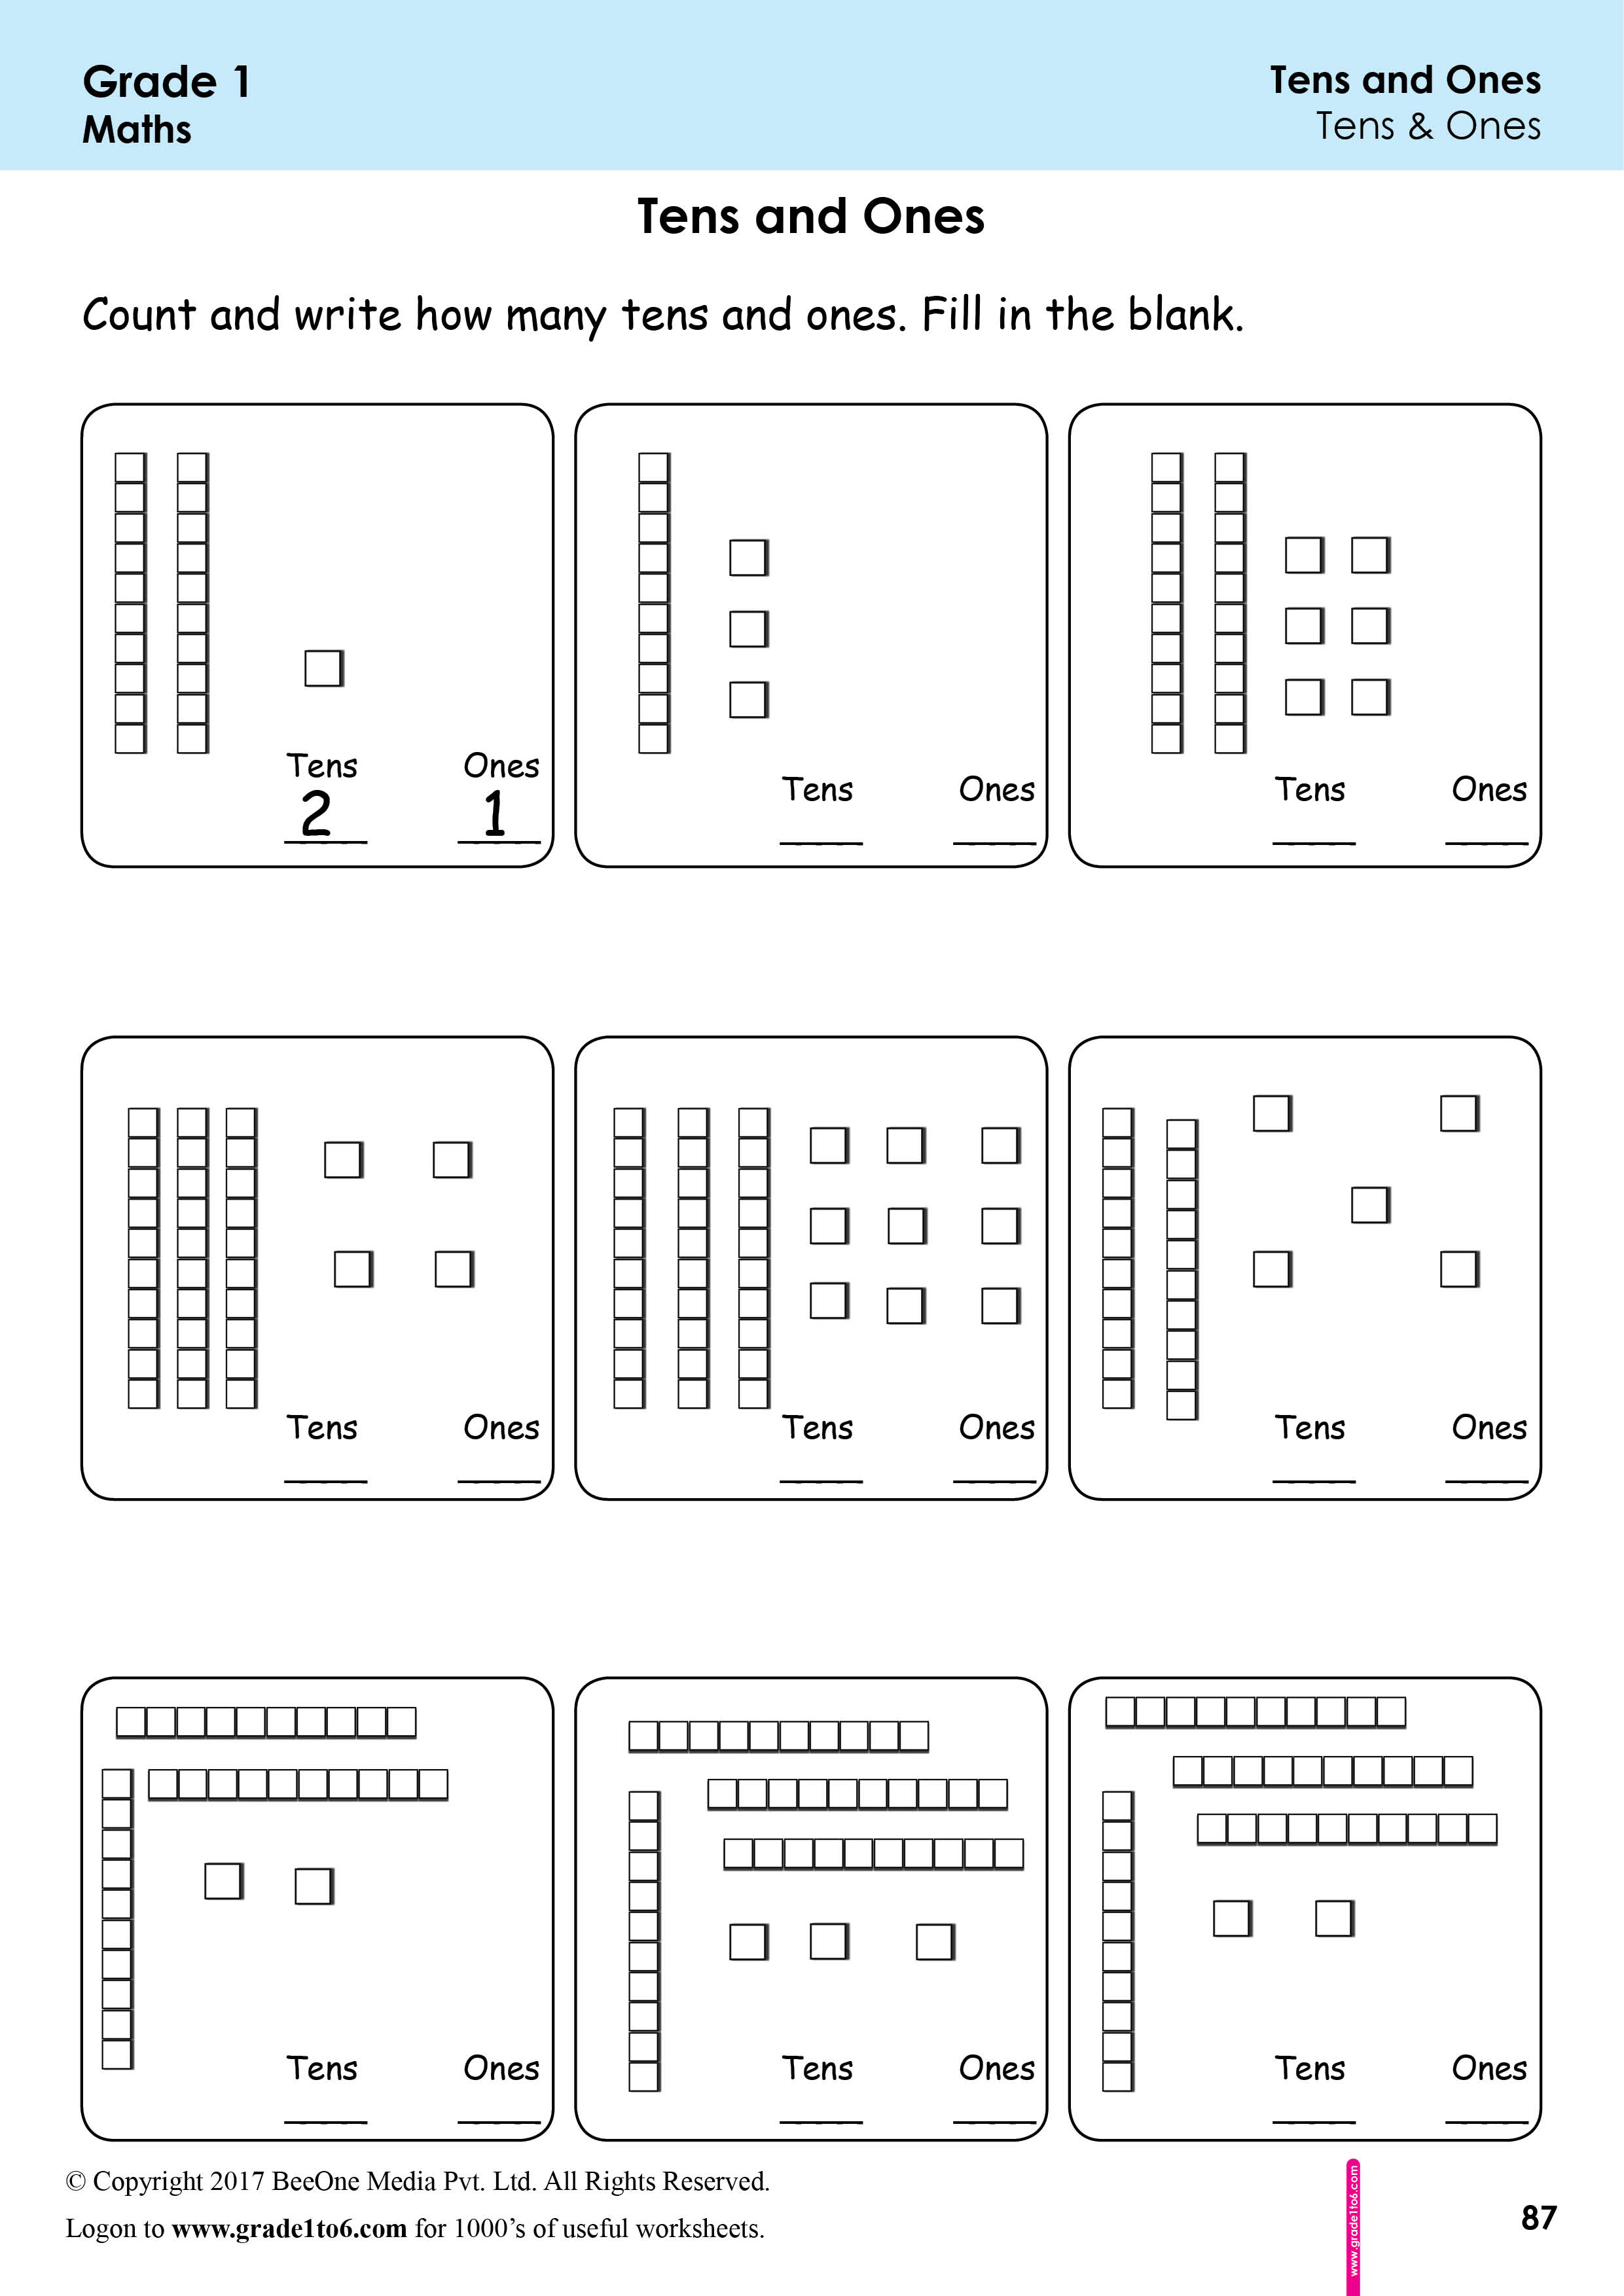 1st-grade-math-worksheets-place-value-tens-ones-1gif-1-000-atilde-1-294-math-place-value